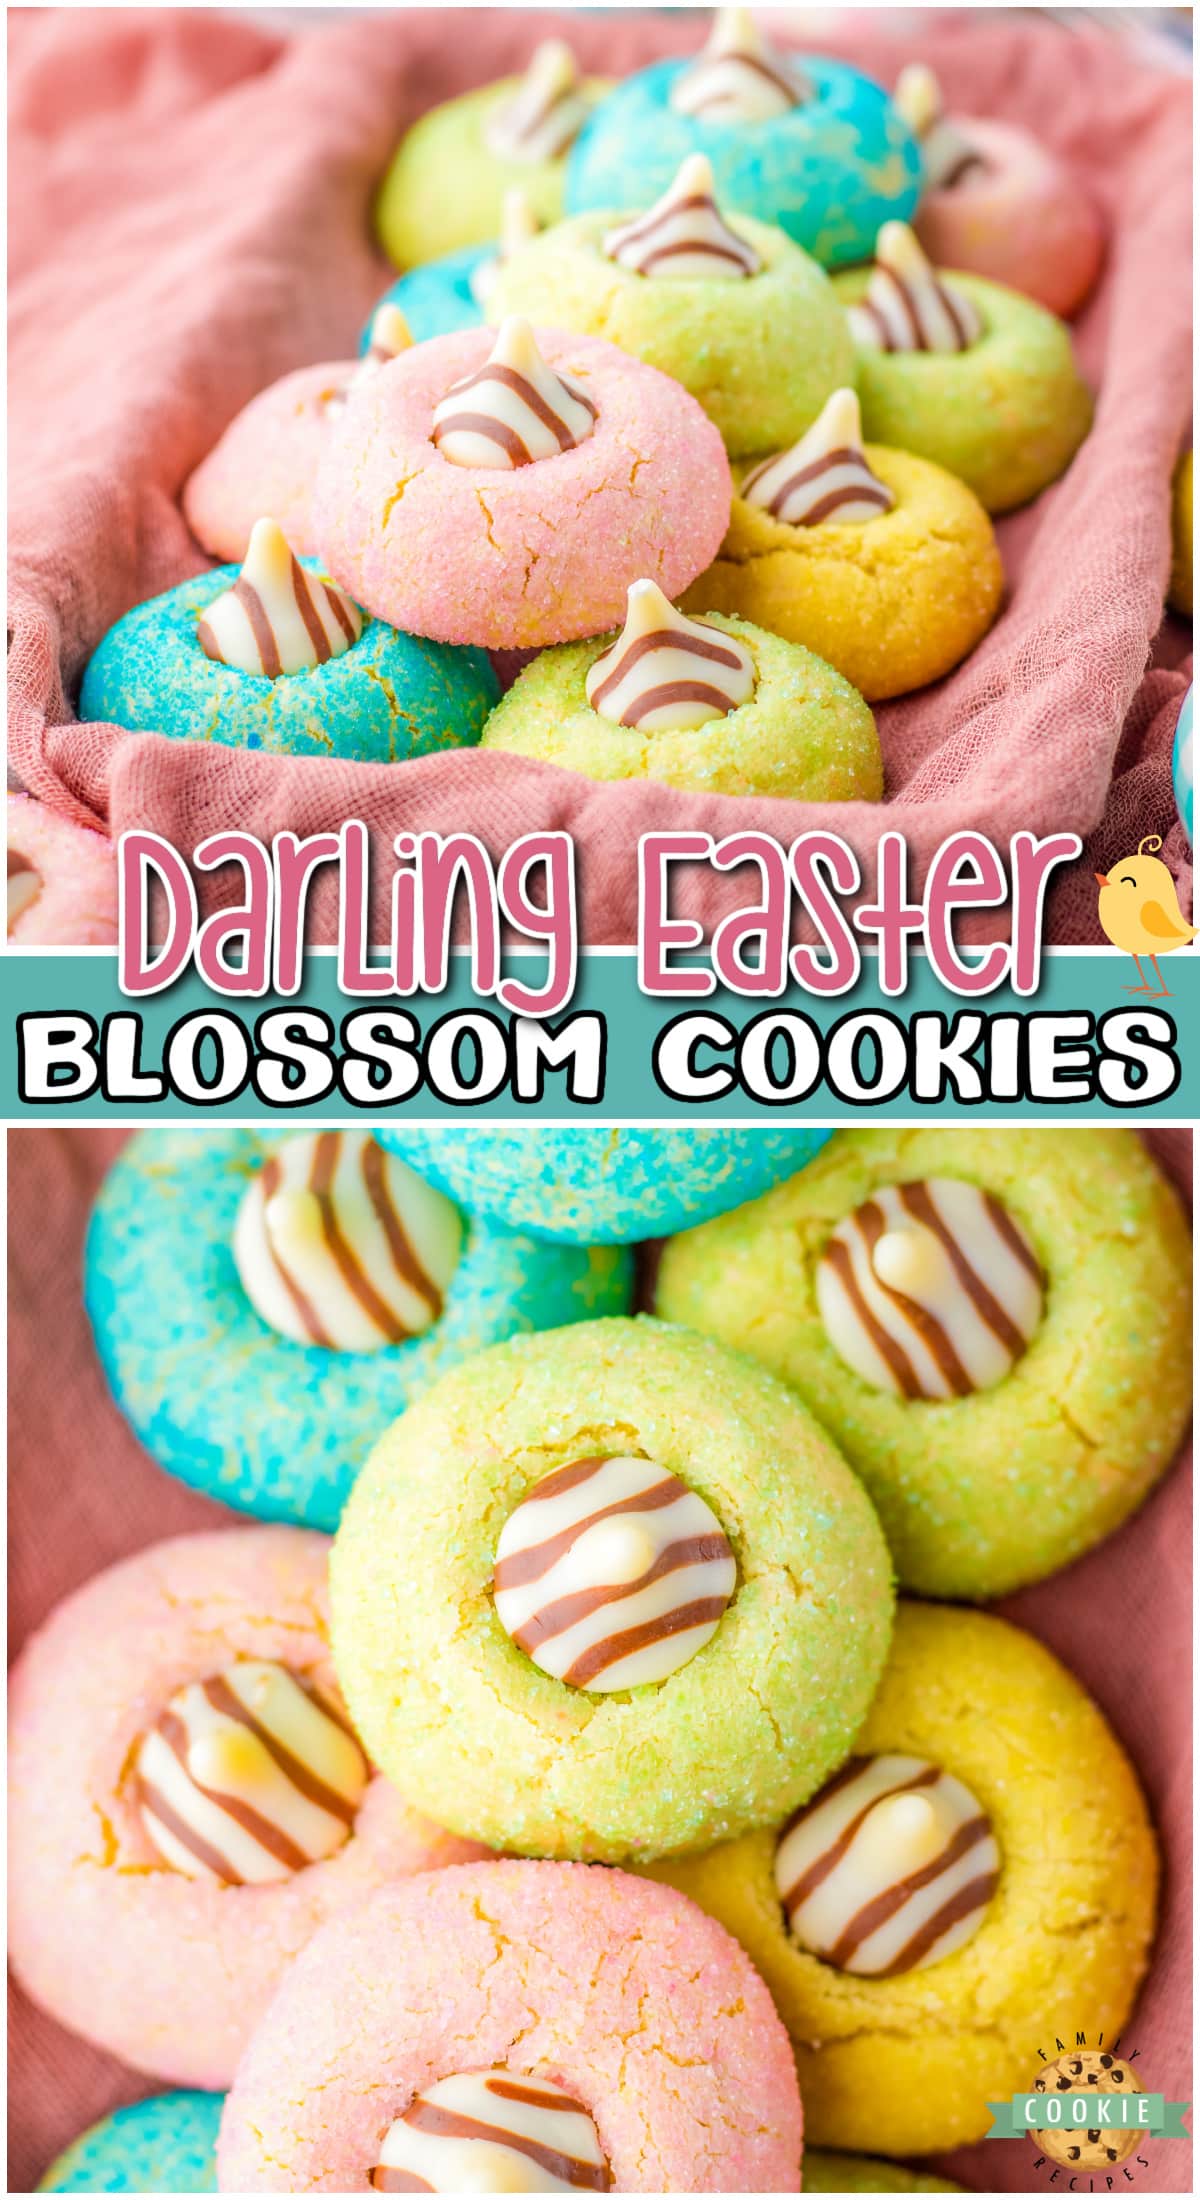 Easter Blossom Cookies are rolled in pastel sanding sugar before being baked and topped with a chocolate kiss. Lovely simple Easter cookies are a festive family favorite!